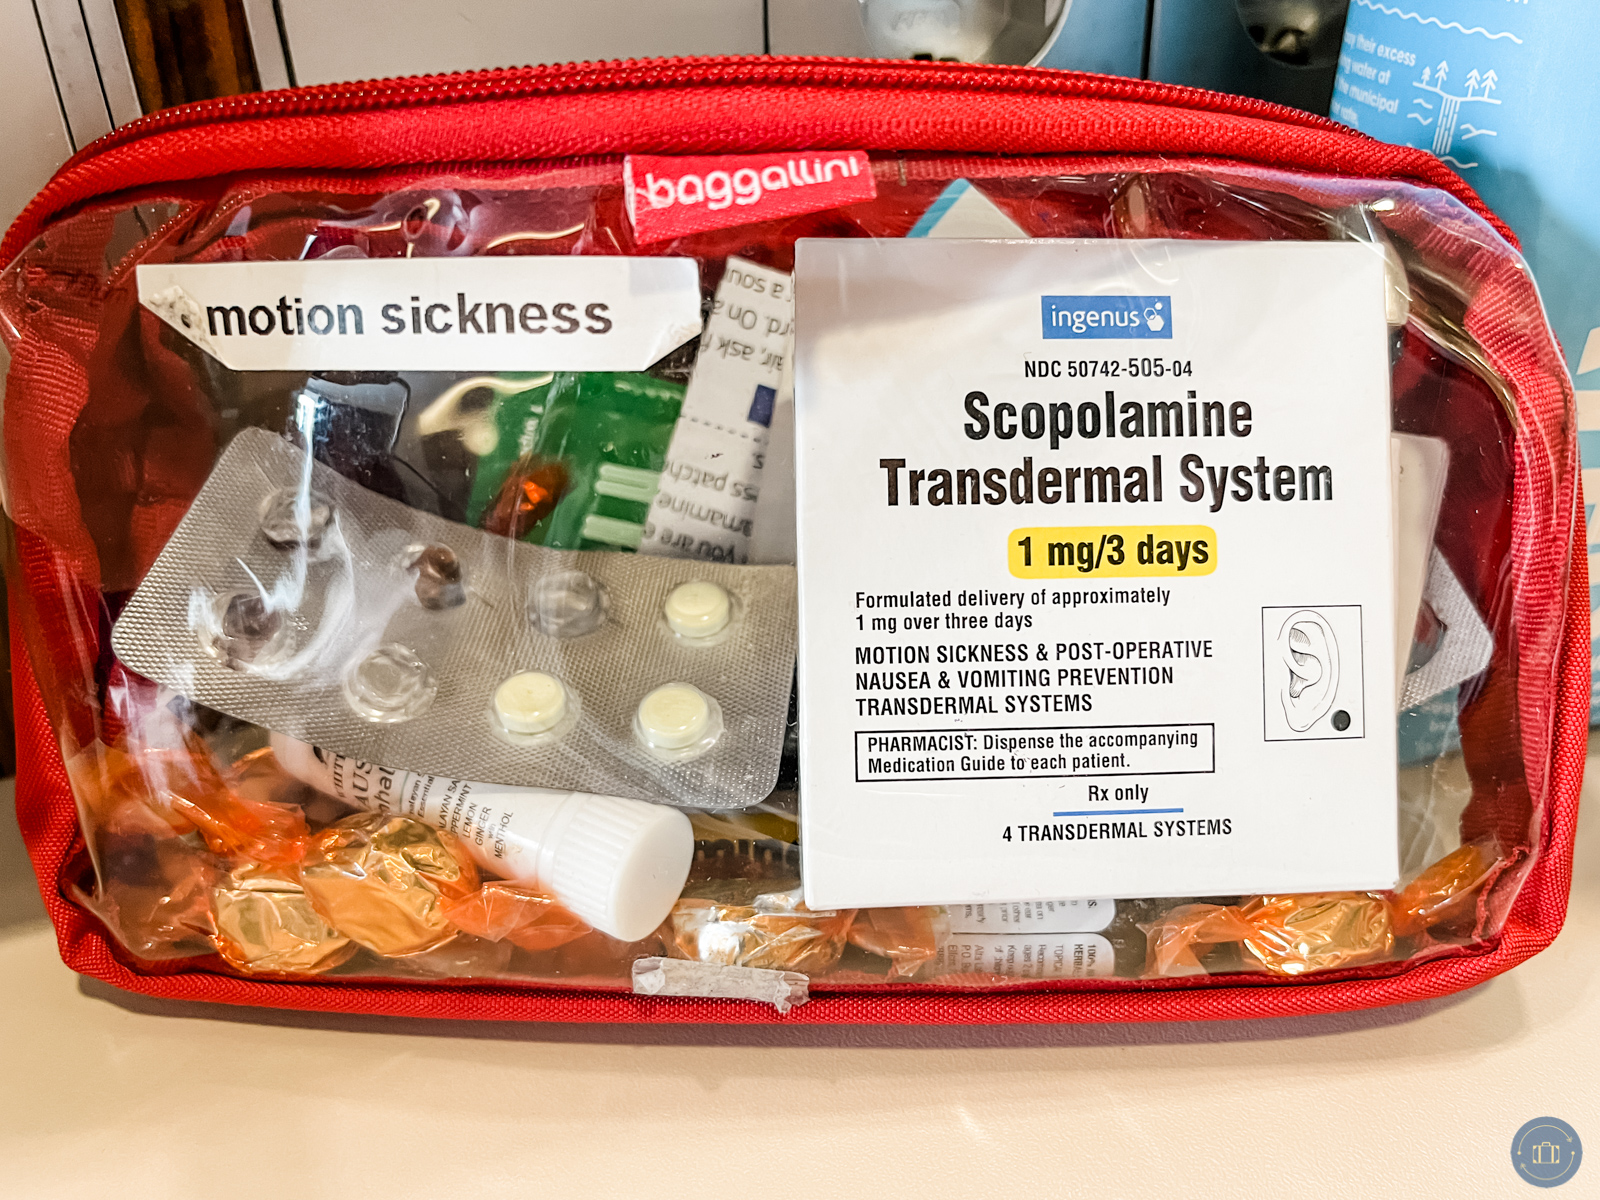 motion sickness medicine bag to pack for cruise ship